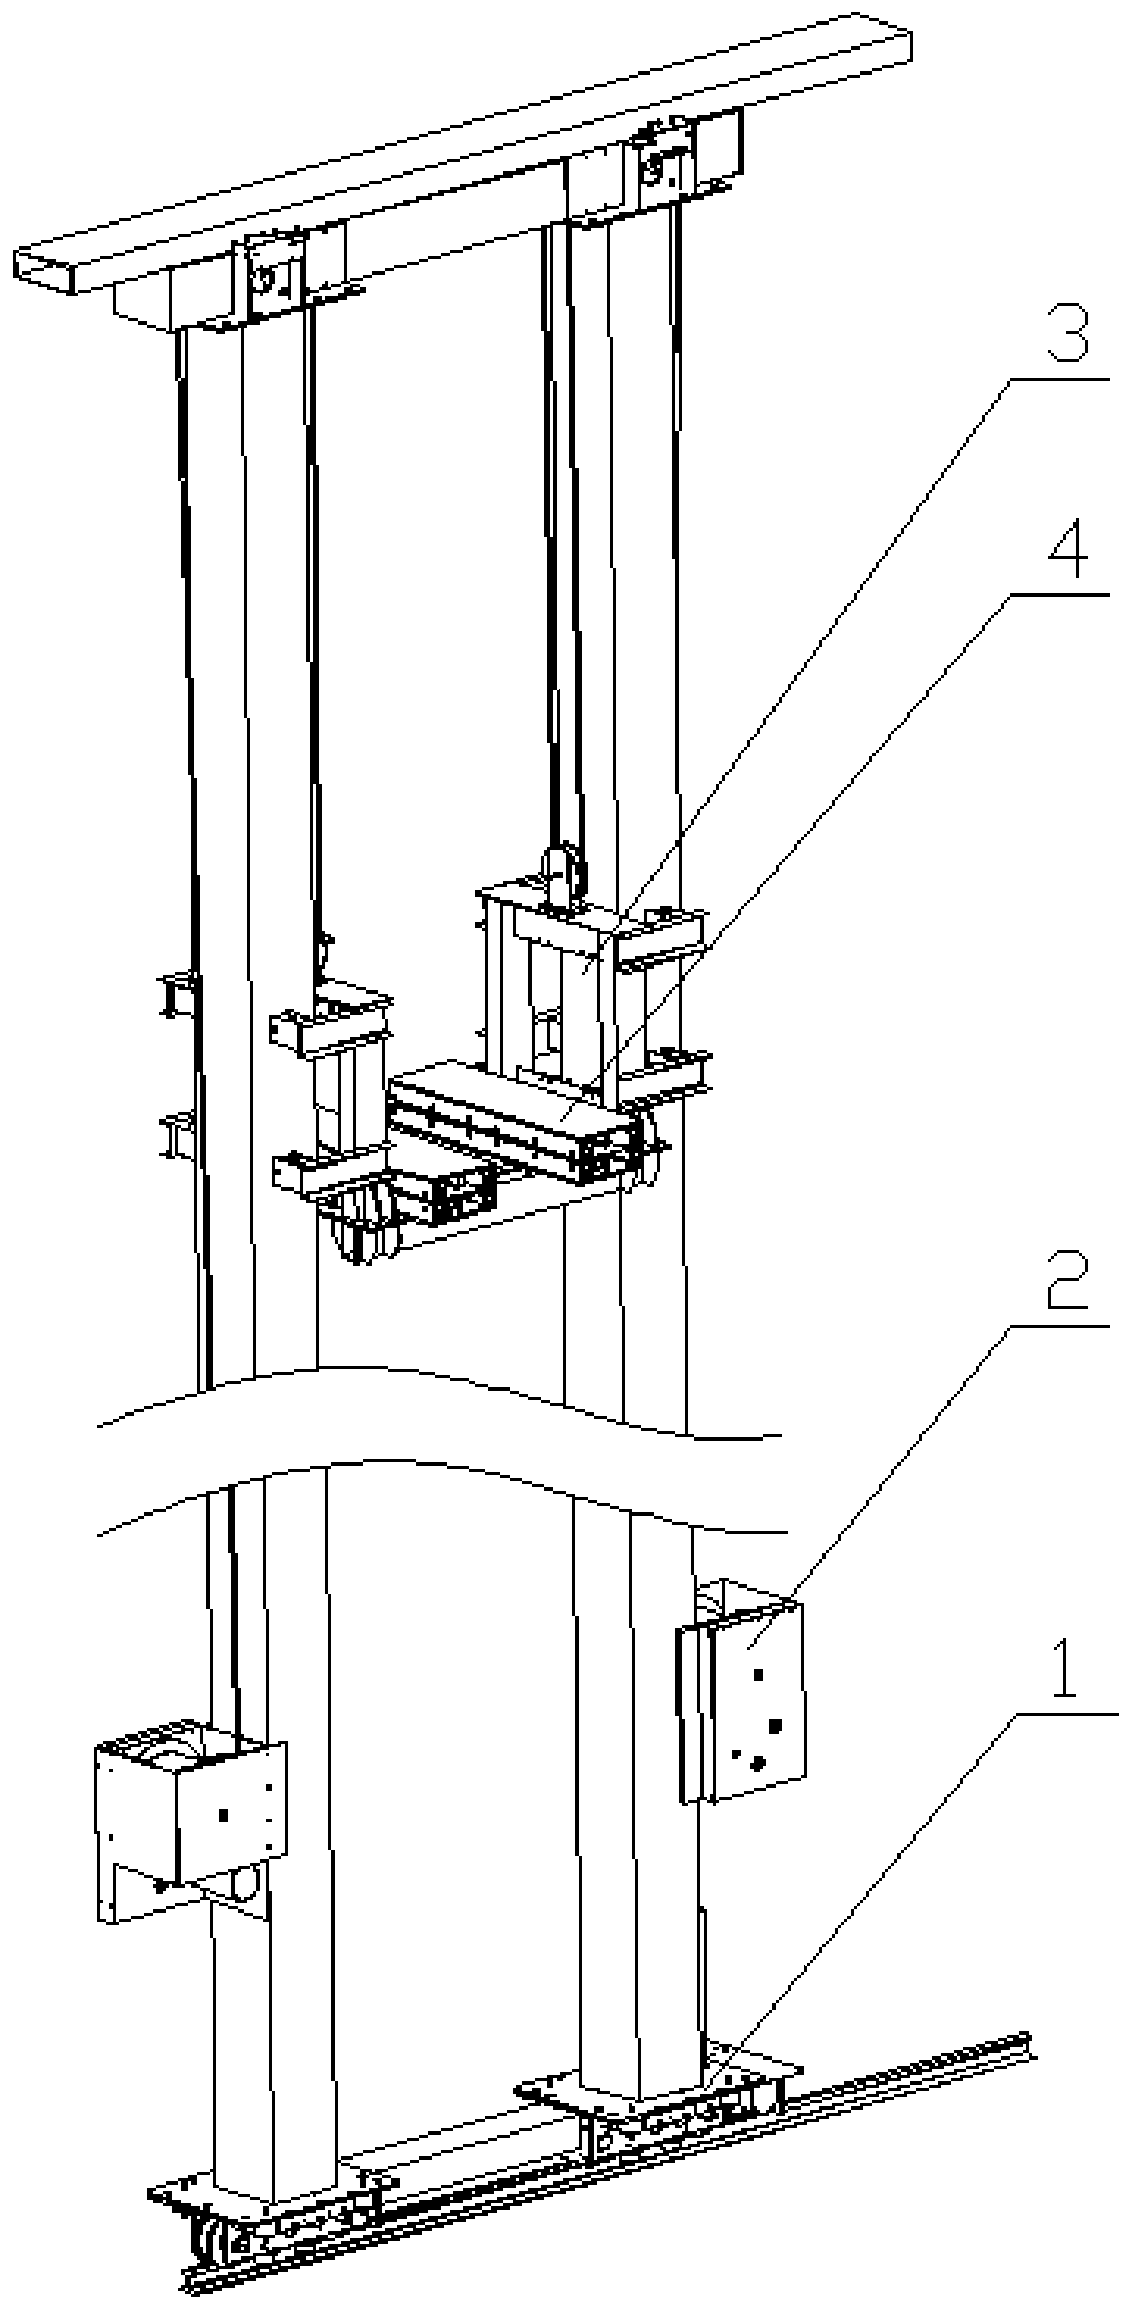 Vision logic control method used for stacking machine